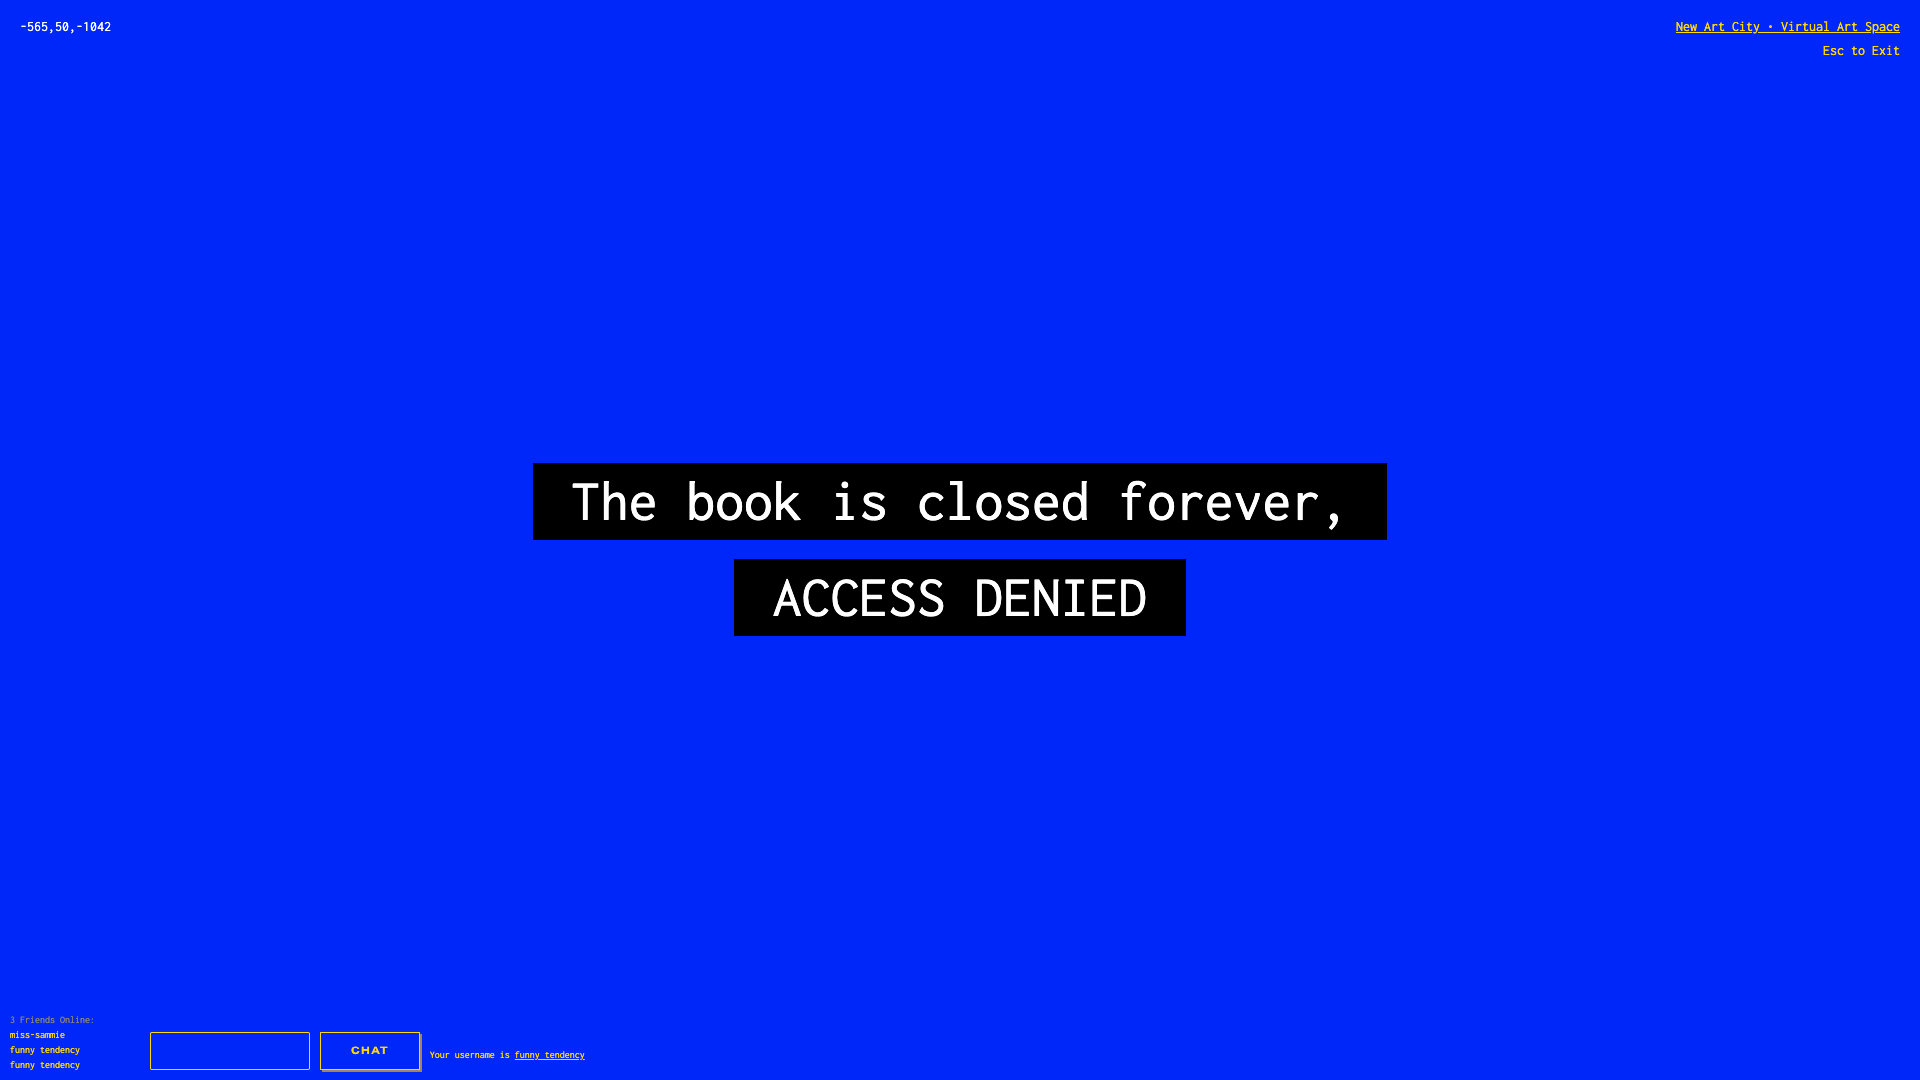 Deep blue screenshot, in the middle reads "The book is closed forever, ACCESS DENIED"